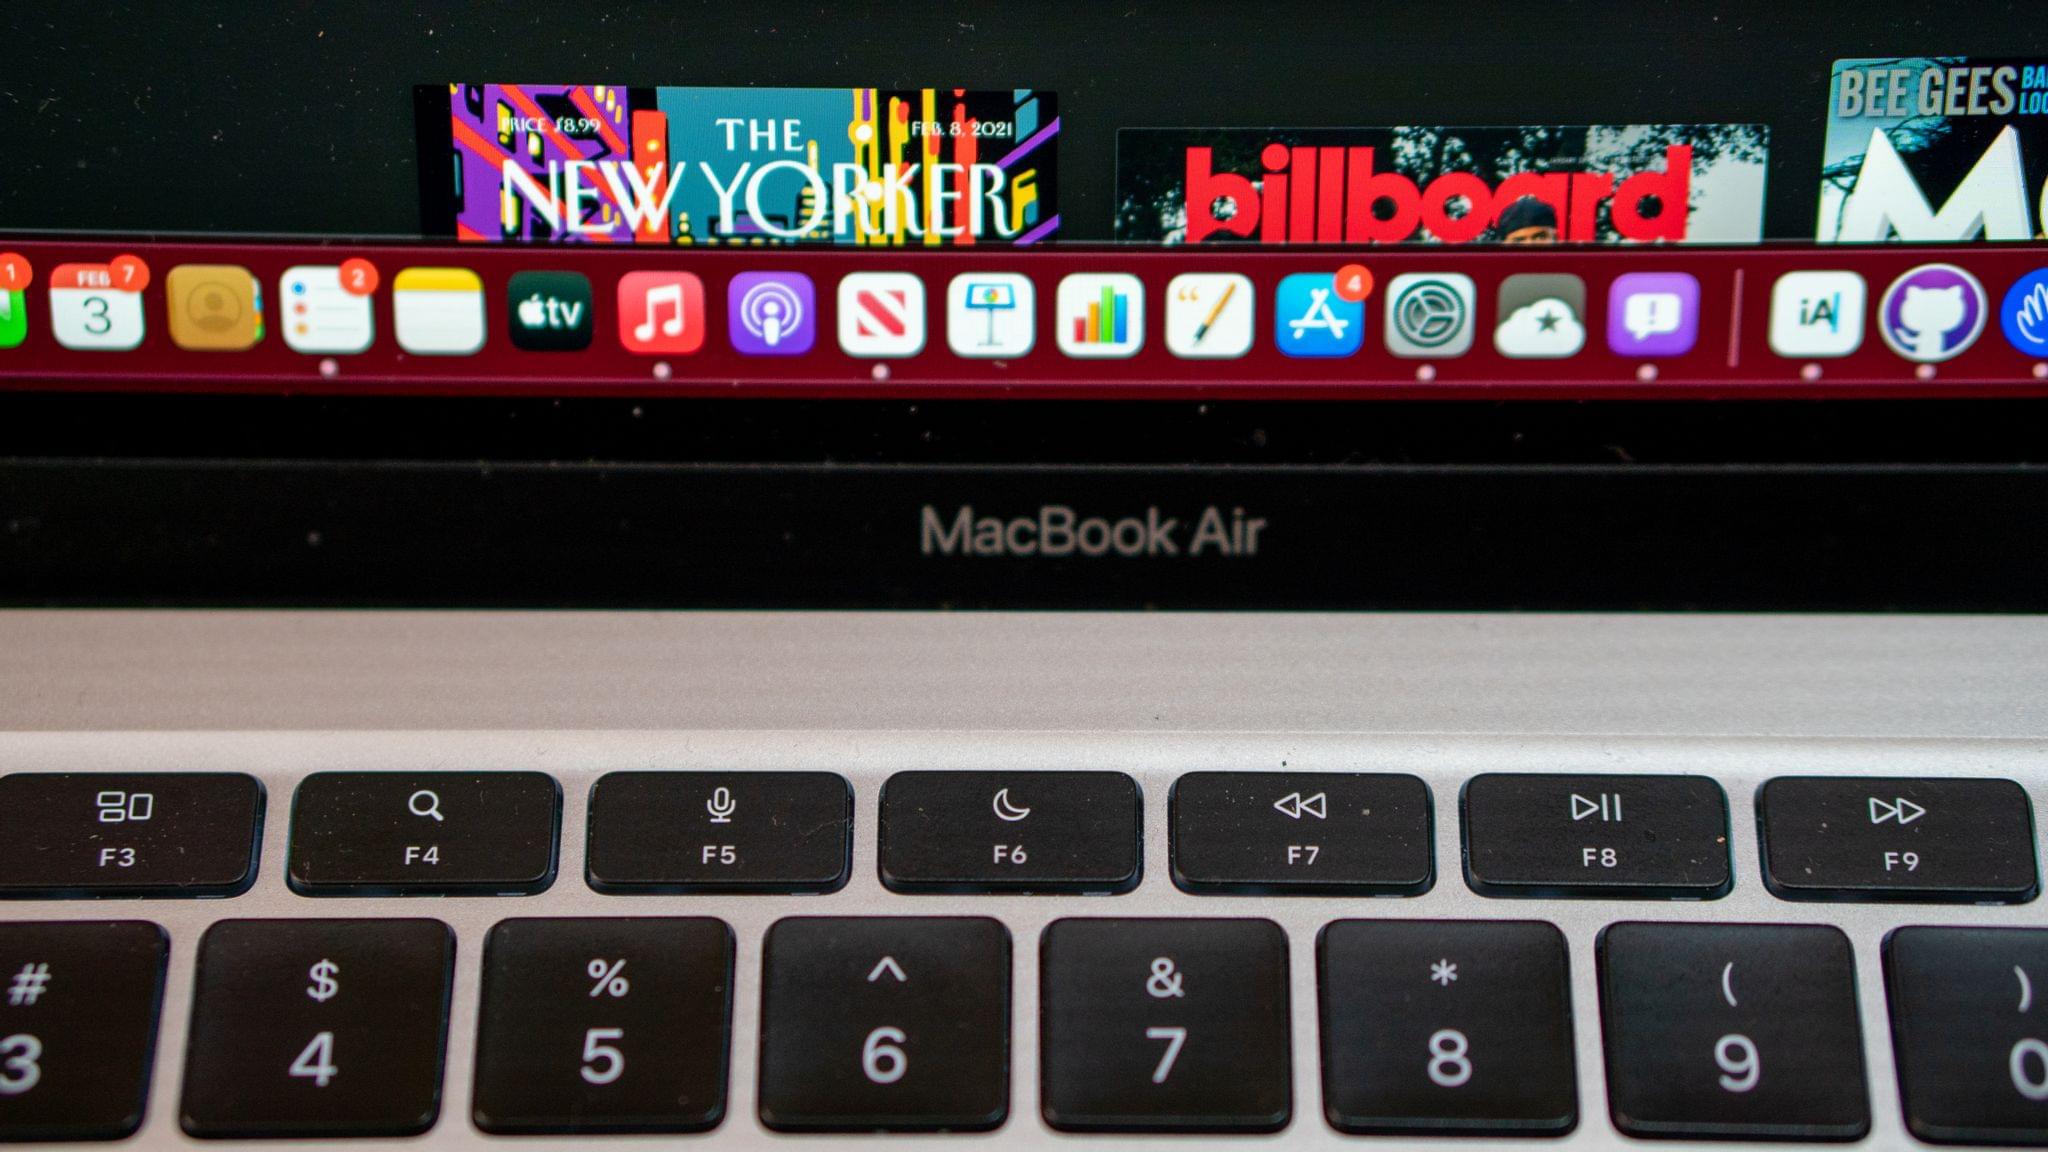 The Air adds Spotlight, Dictation and Siri, and Do Not Disturb function keys.